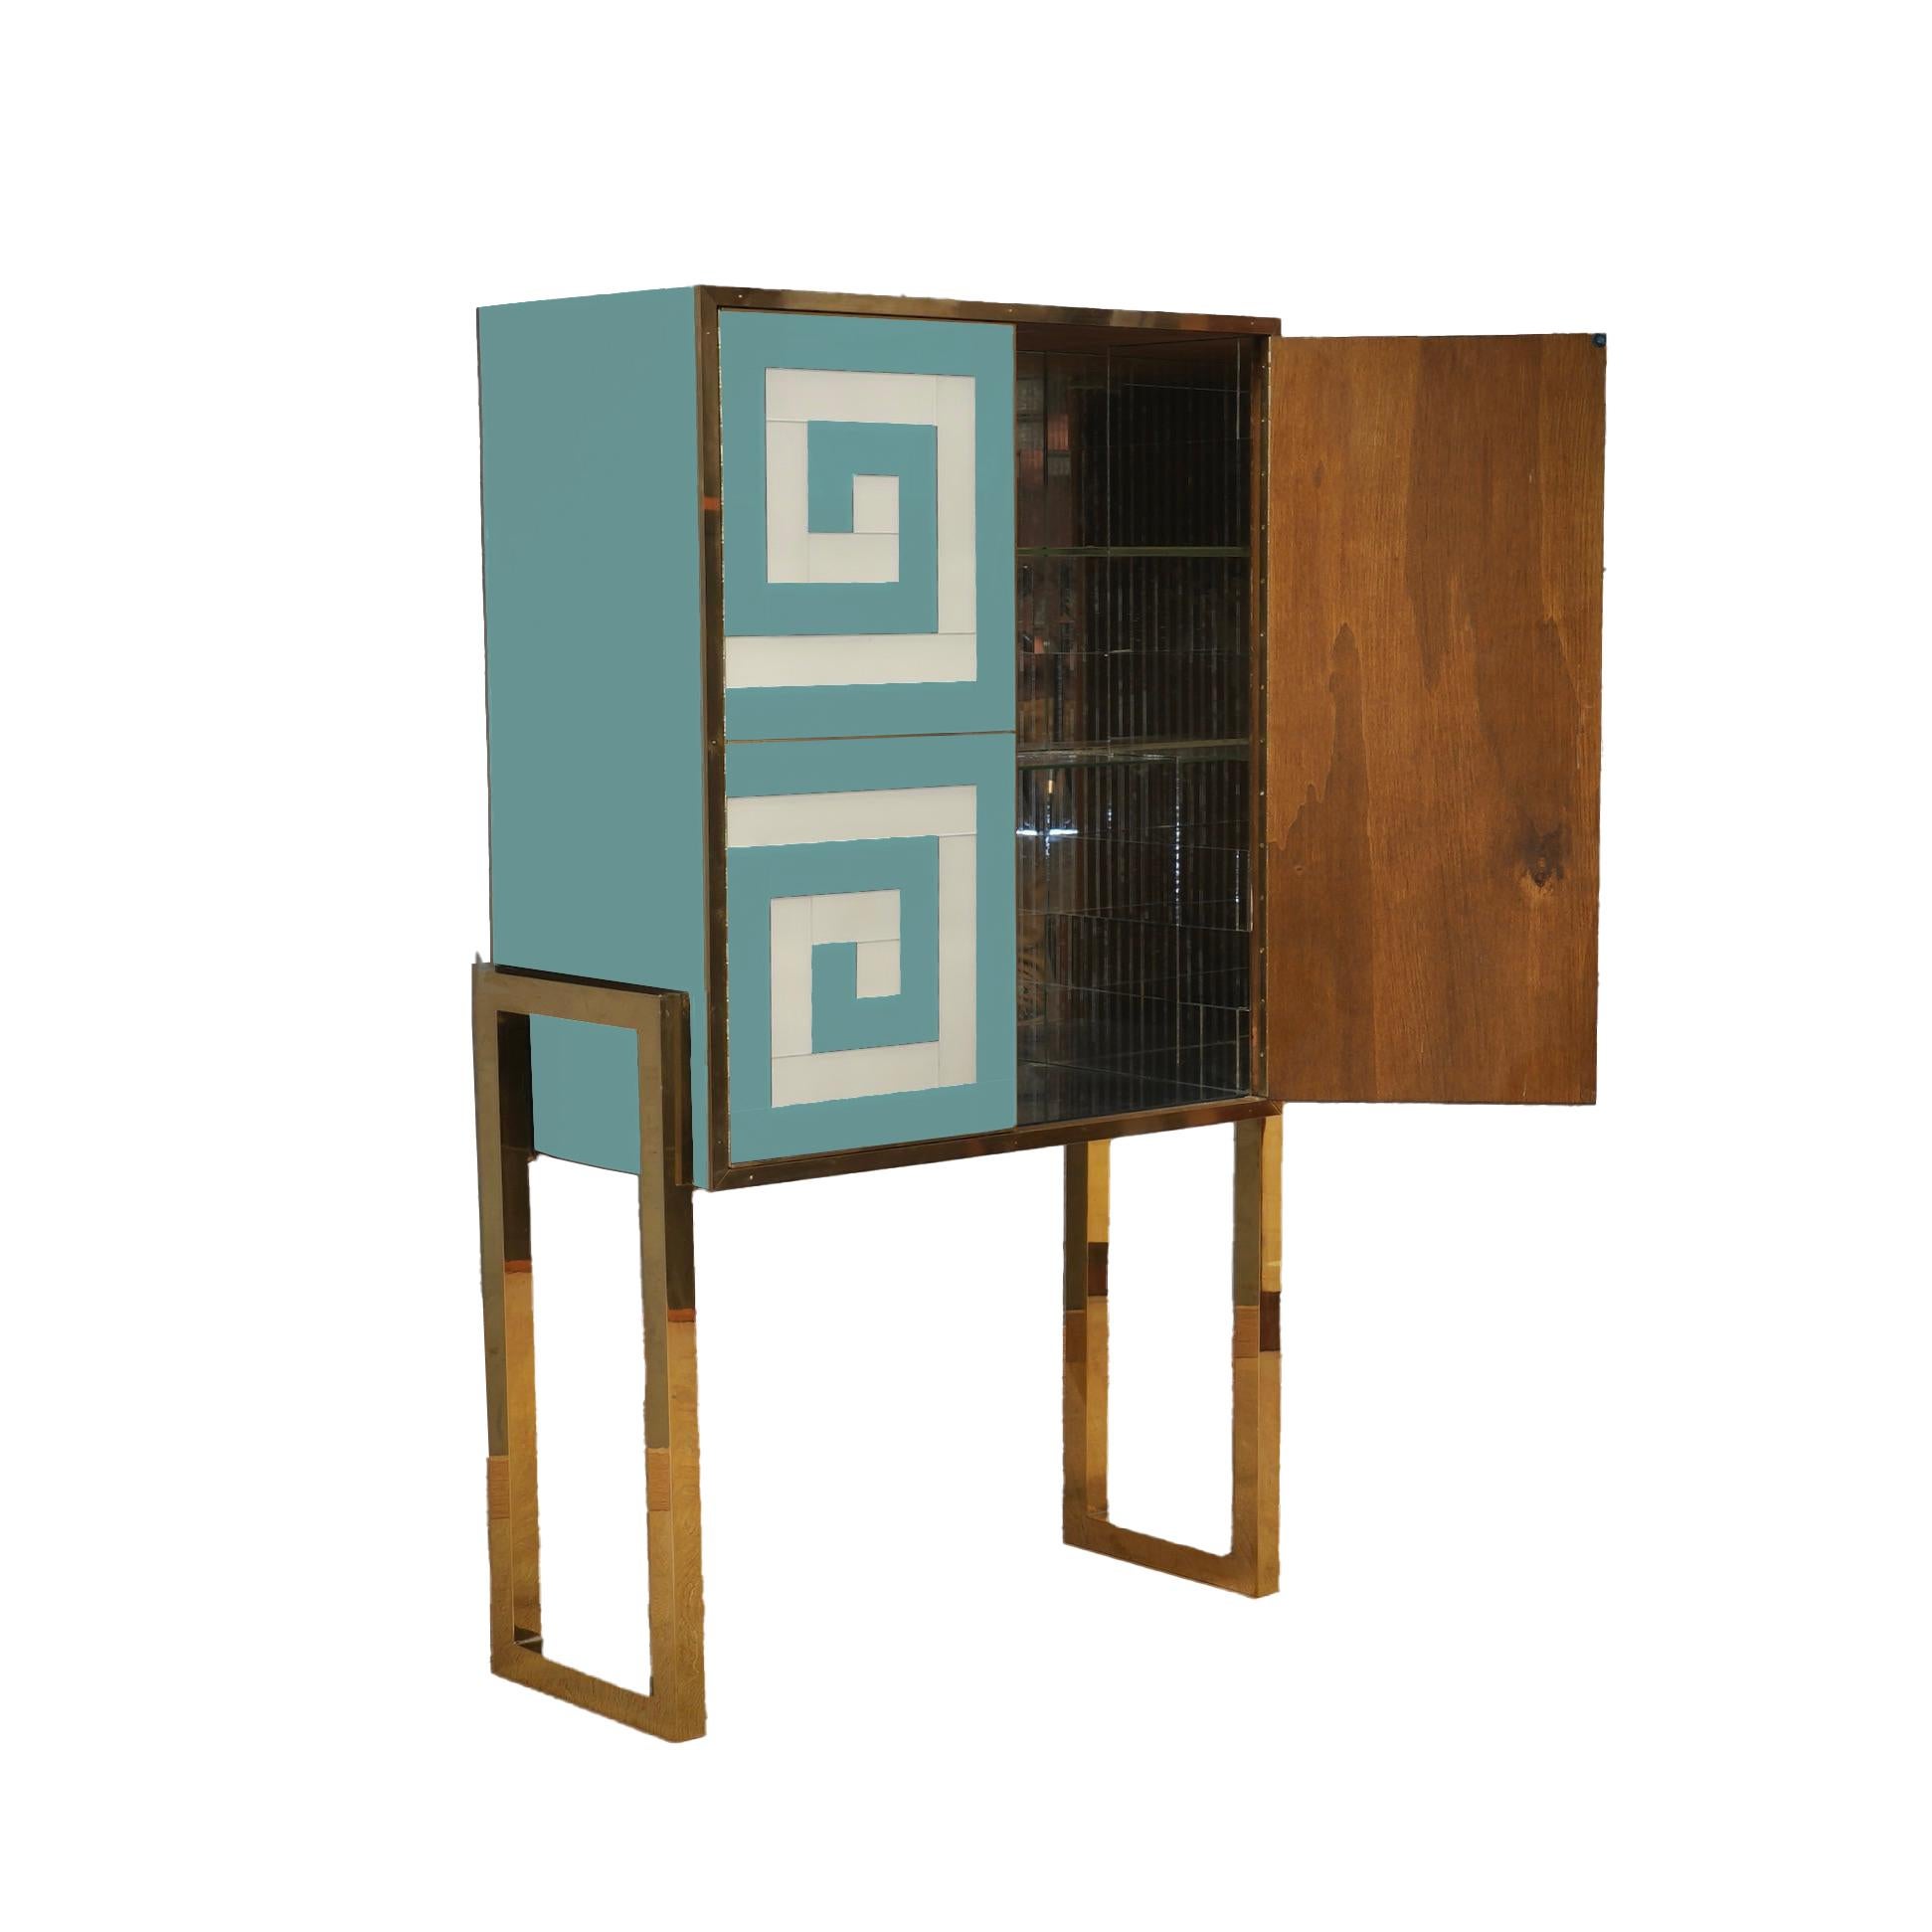 Discover the charm of Italian craftsmanship with this Spectacular Light Blue & White Bar Cabinet, a masterpiece of design and functionality. 

Handcrafted by skilled artisans, this unique piece combines traditional techniques with a Mid-Century